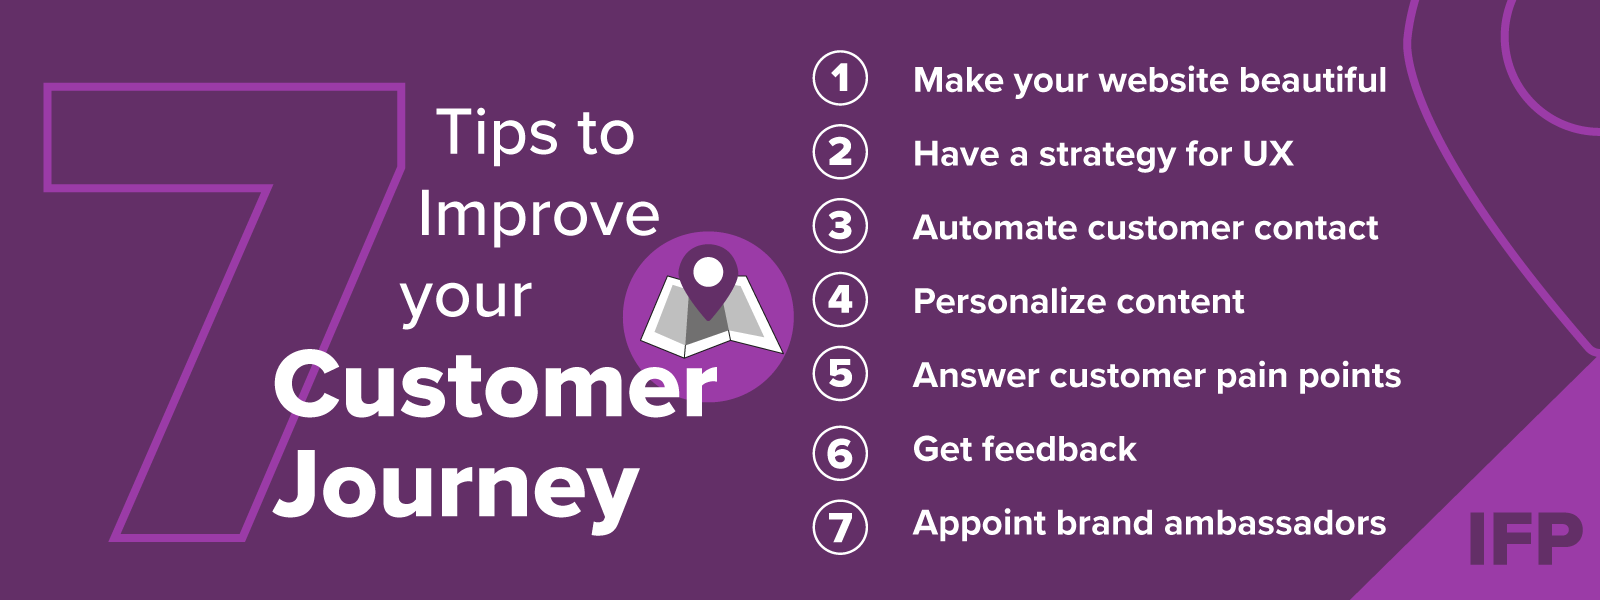 IFP visual showing 7 ways businesses and marketers can improve the customer journey